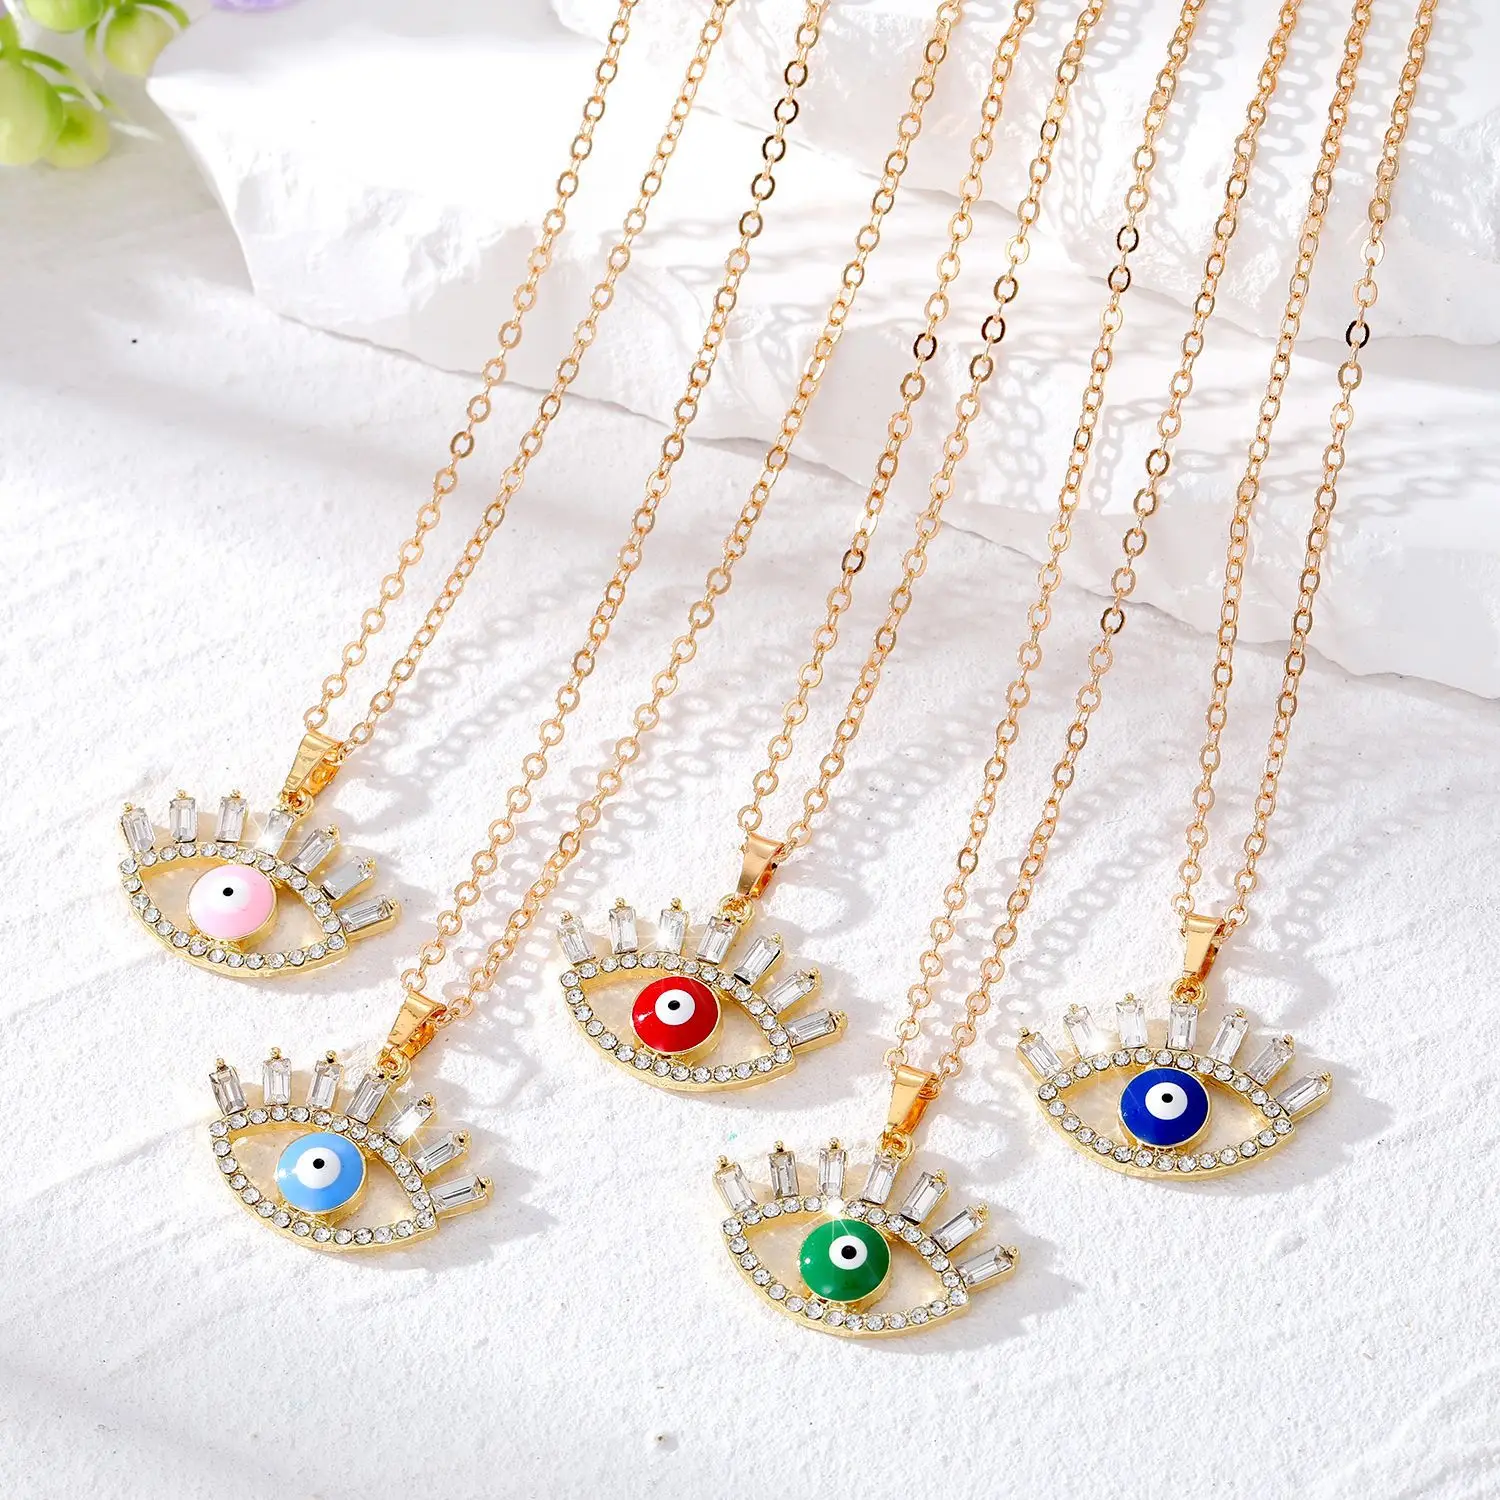 

20pcs Lucky Evil Eye Pendant Necklaces for Women Gift Jewelry Zircon Eyelash Turkish Sweater Clavicle Chain Necklace